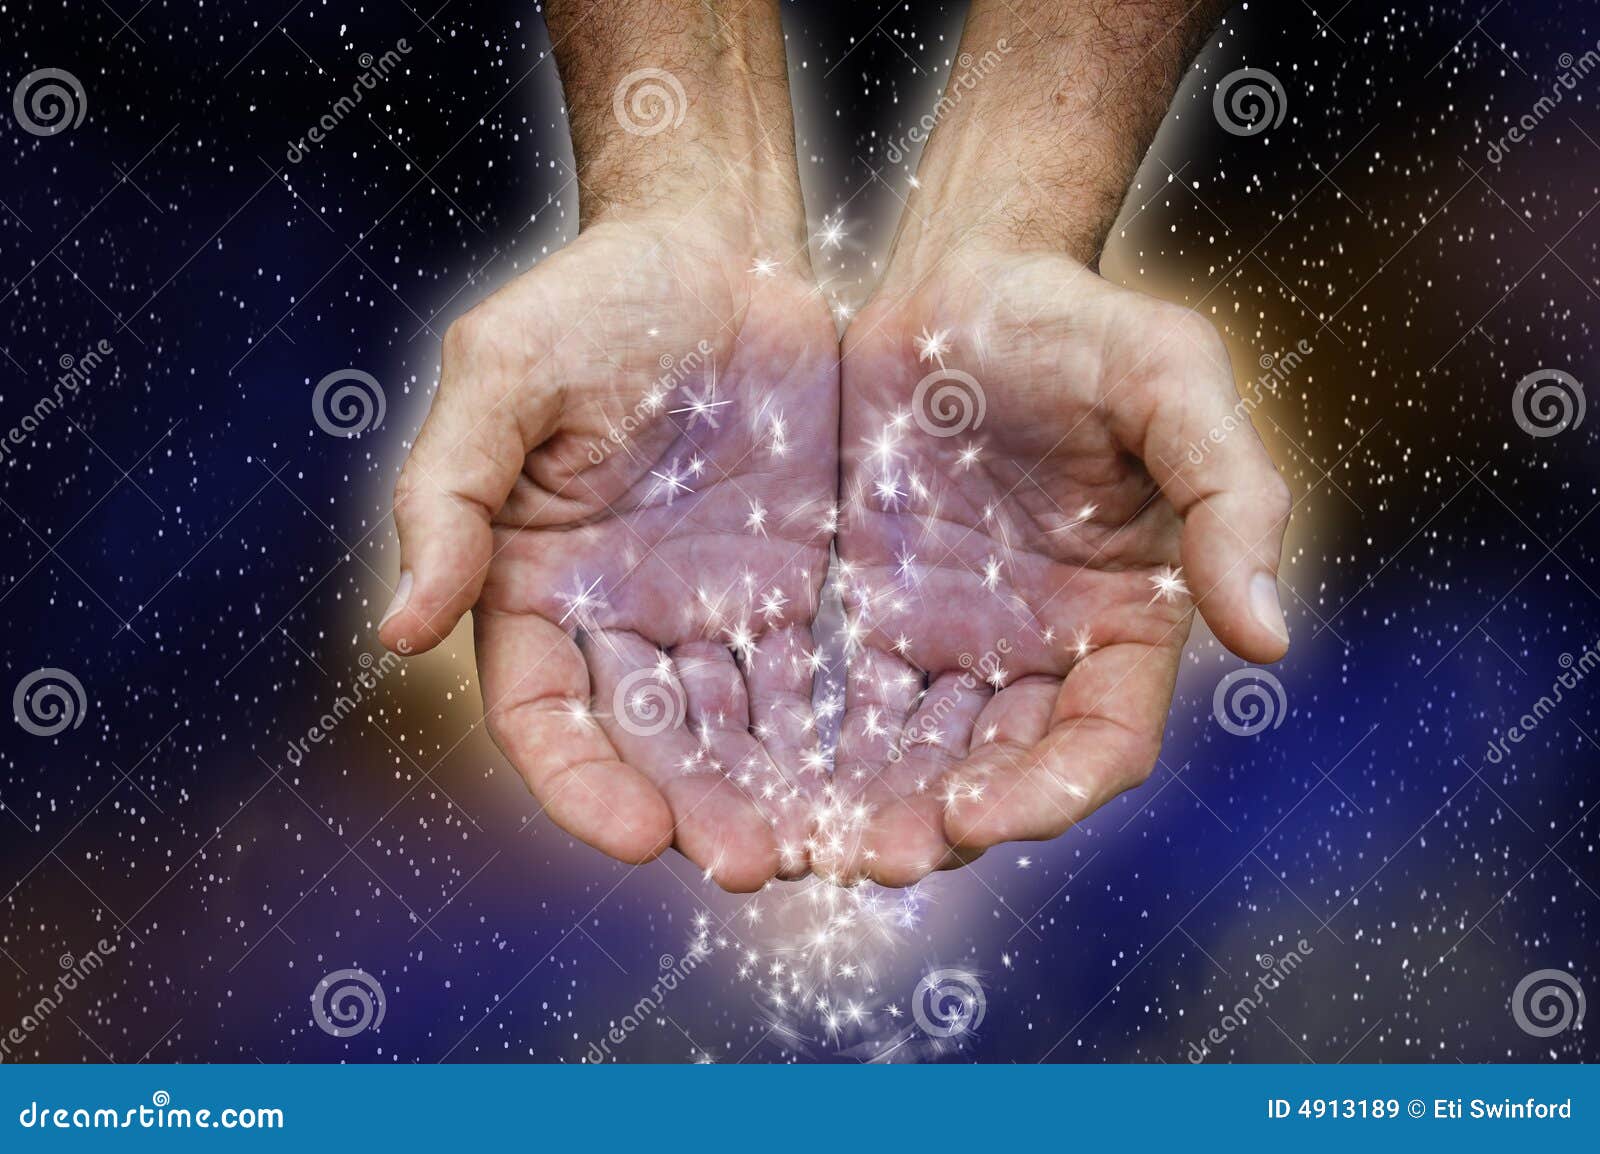 Hands Holding Stars Royalty Free Stock Images - Image: 4913189